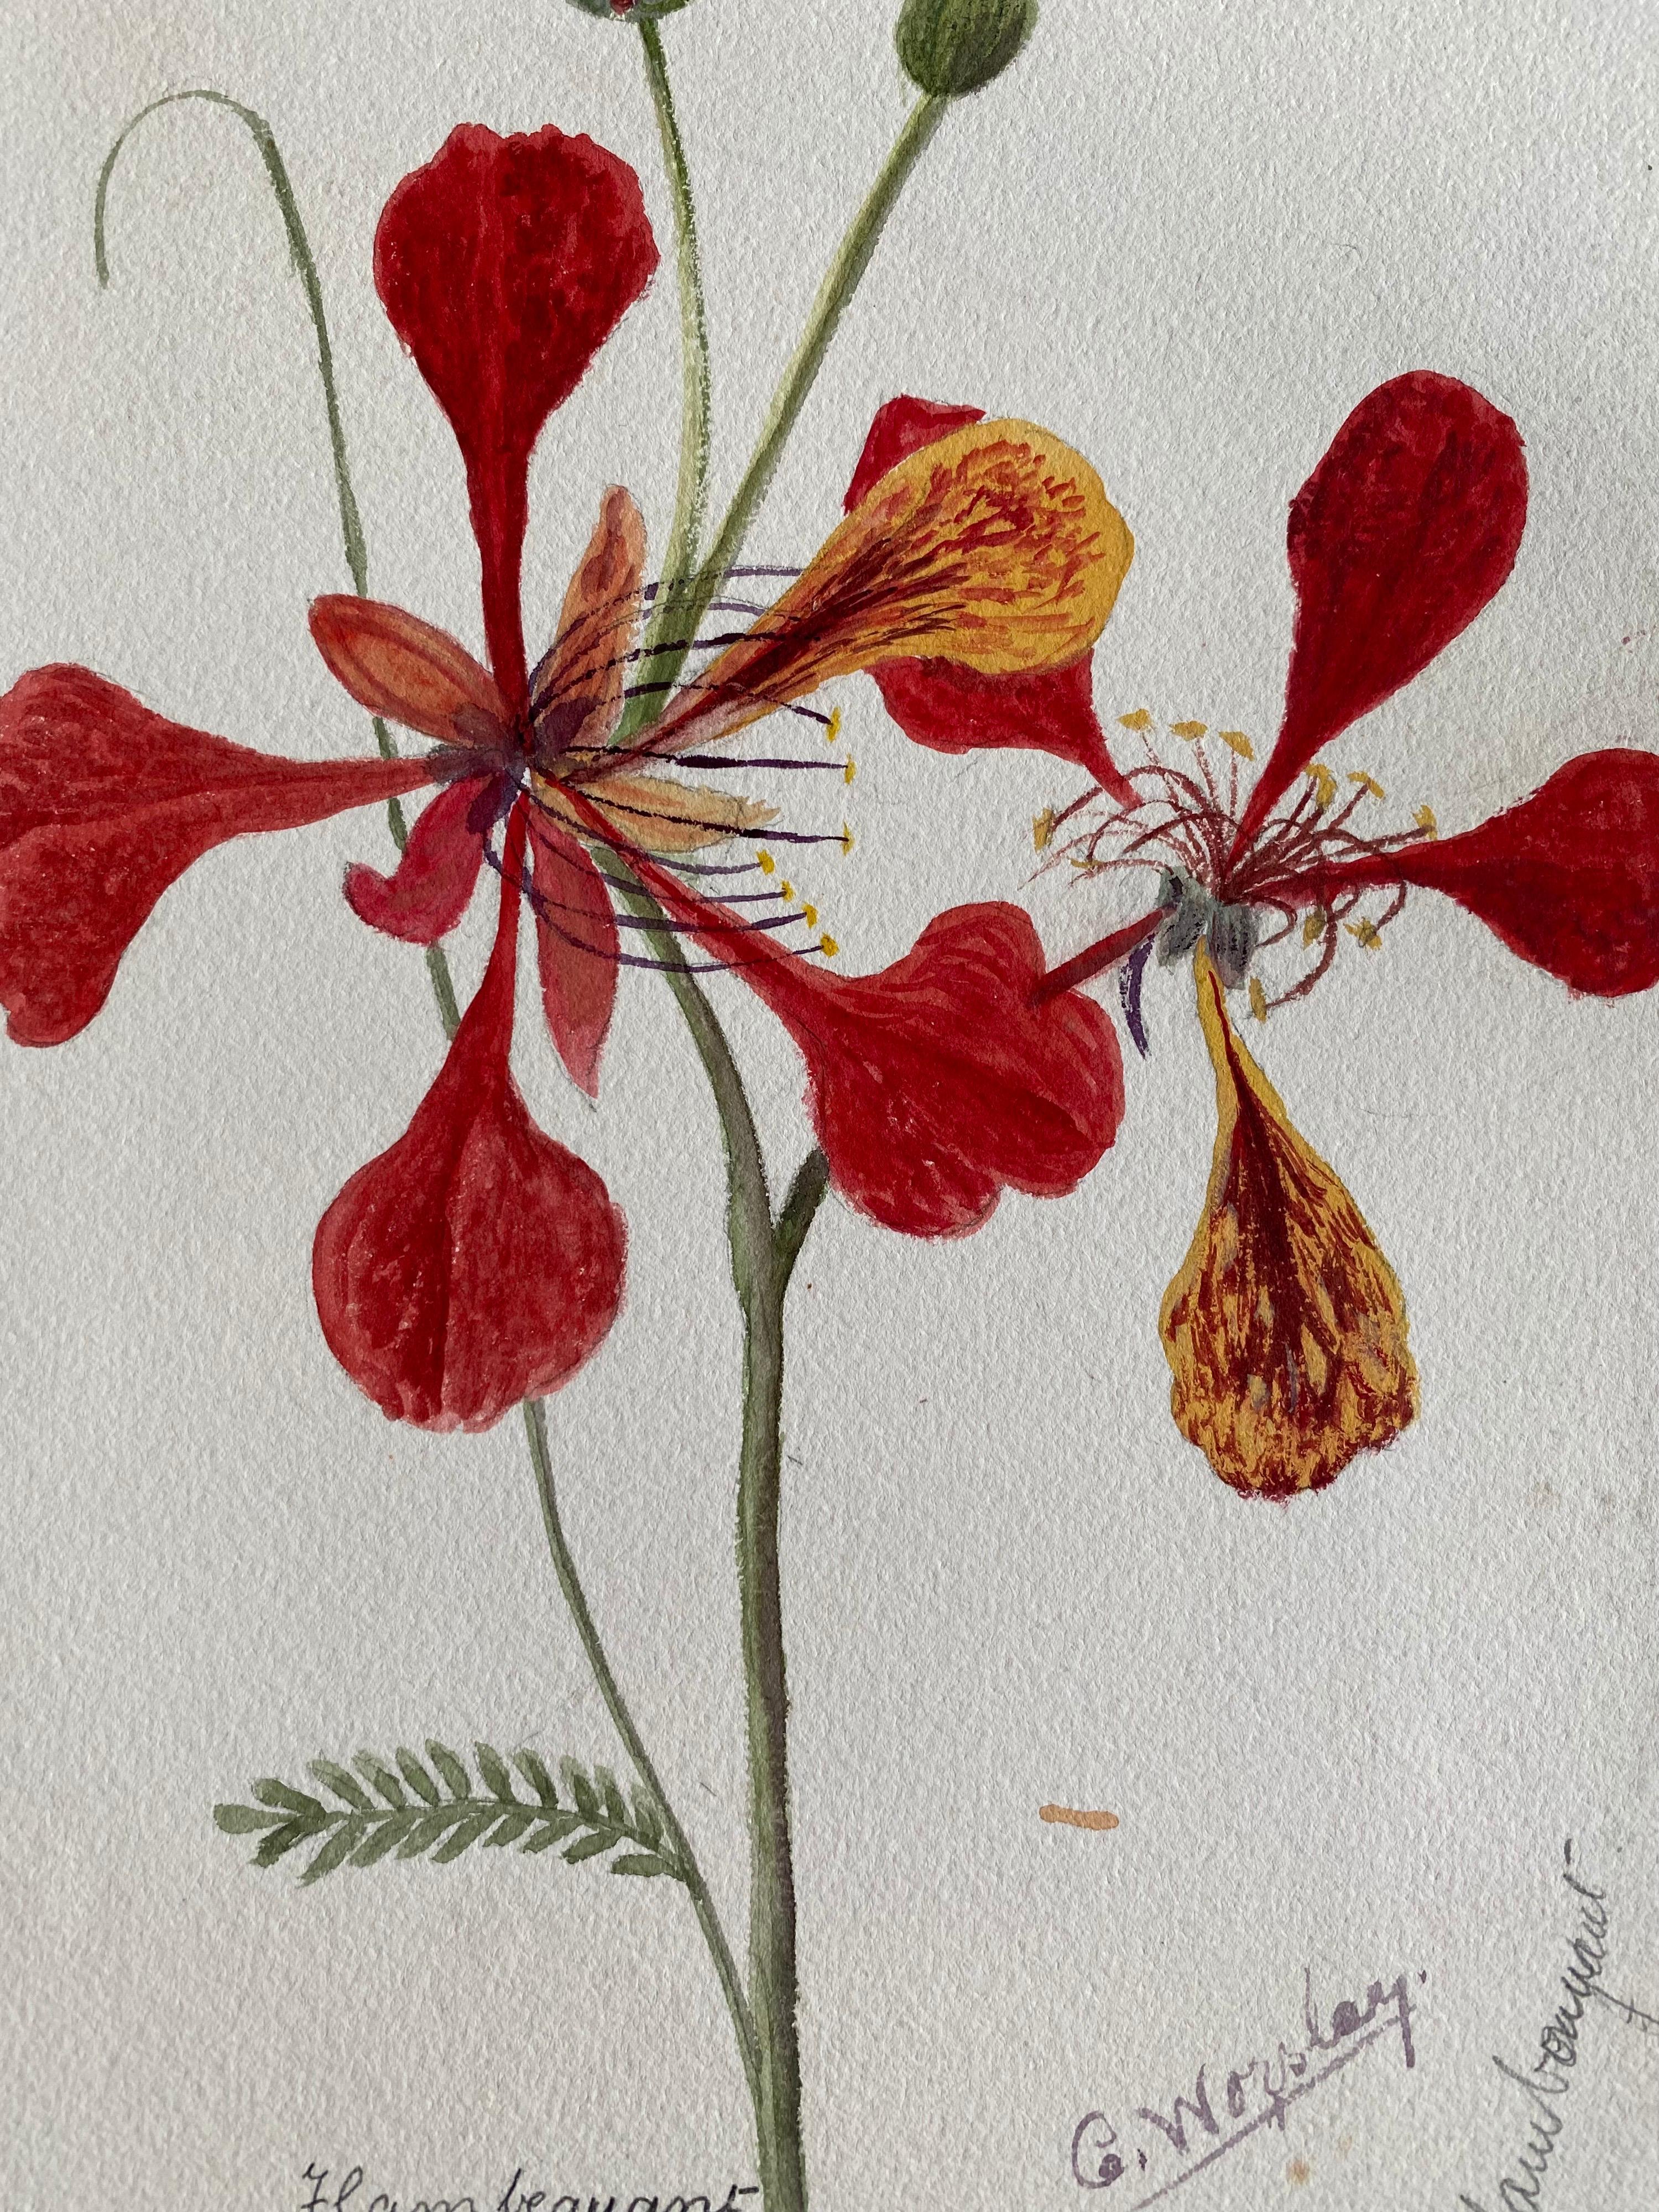 A very fine original antique English botanical watercolour painting depicting this beautiful depiction of a flower/ plant. The work came to us from a private collection in Surrey, England and had been part of an album of works assembled by the